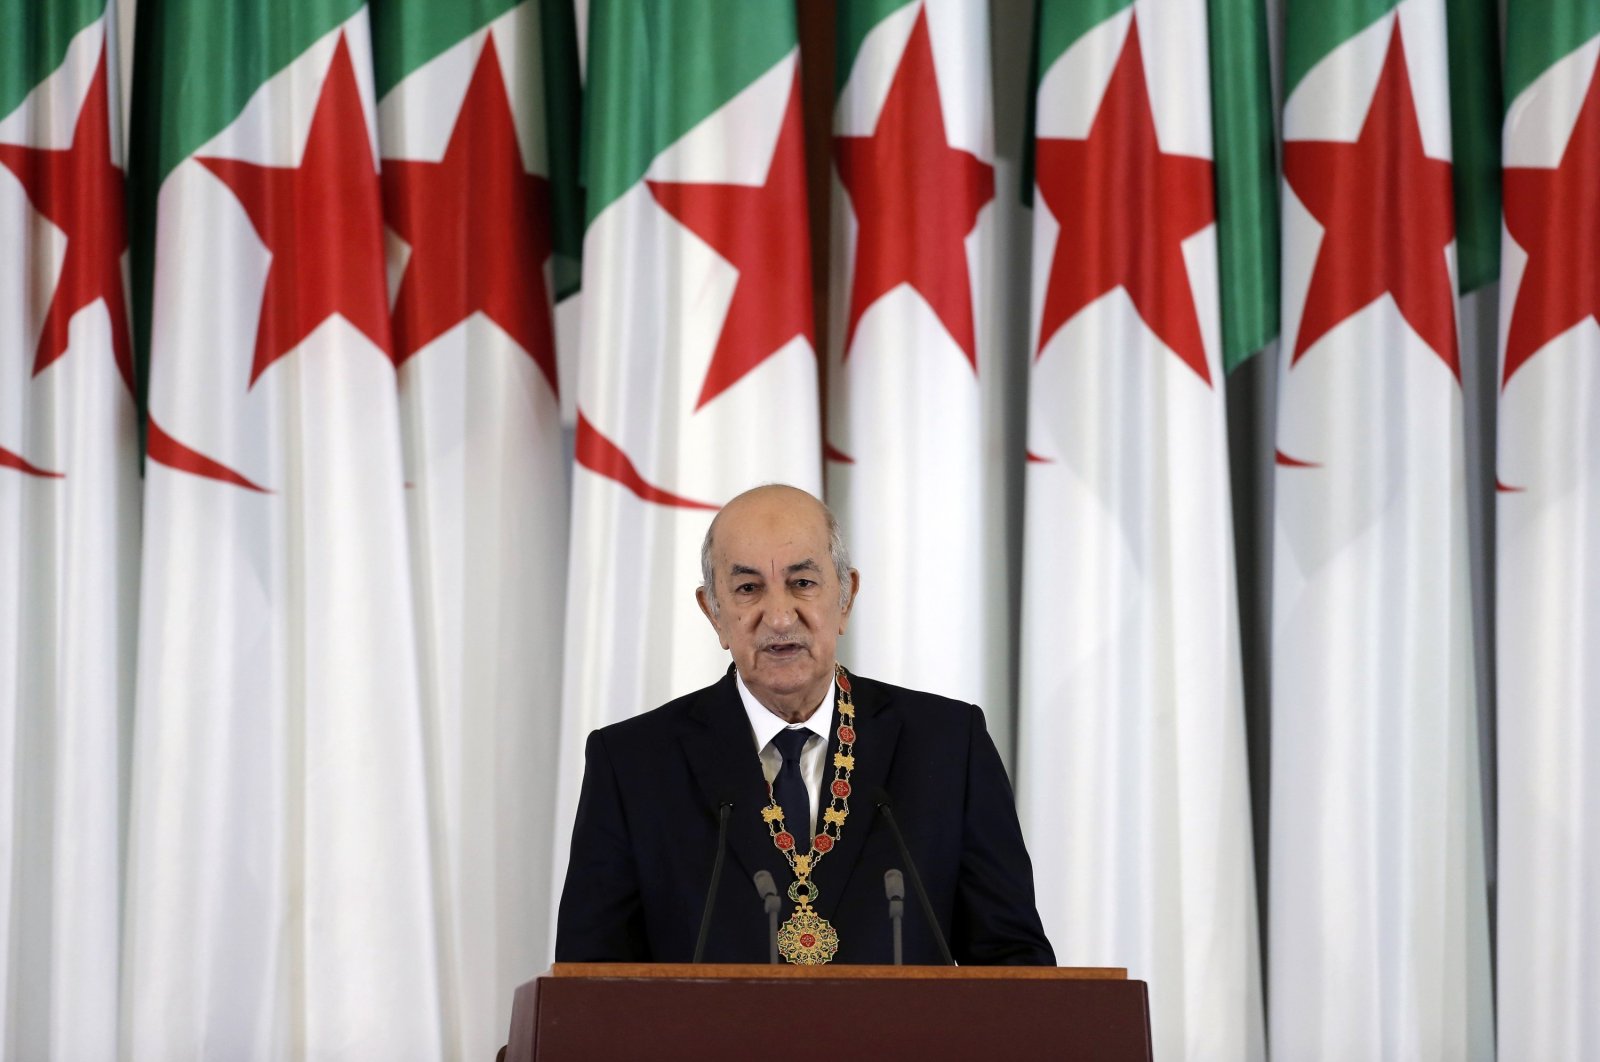 Algerian President Abdelmadjid Tebboune delivers a speech during an inauguration ceremony in the presidential palace, Algiers, Algeria, Thursday, Dec. 19, 2019. (AP File Photo)